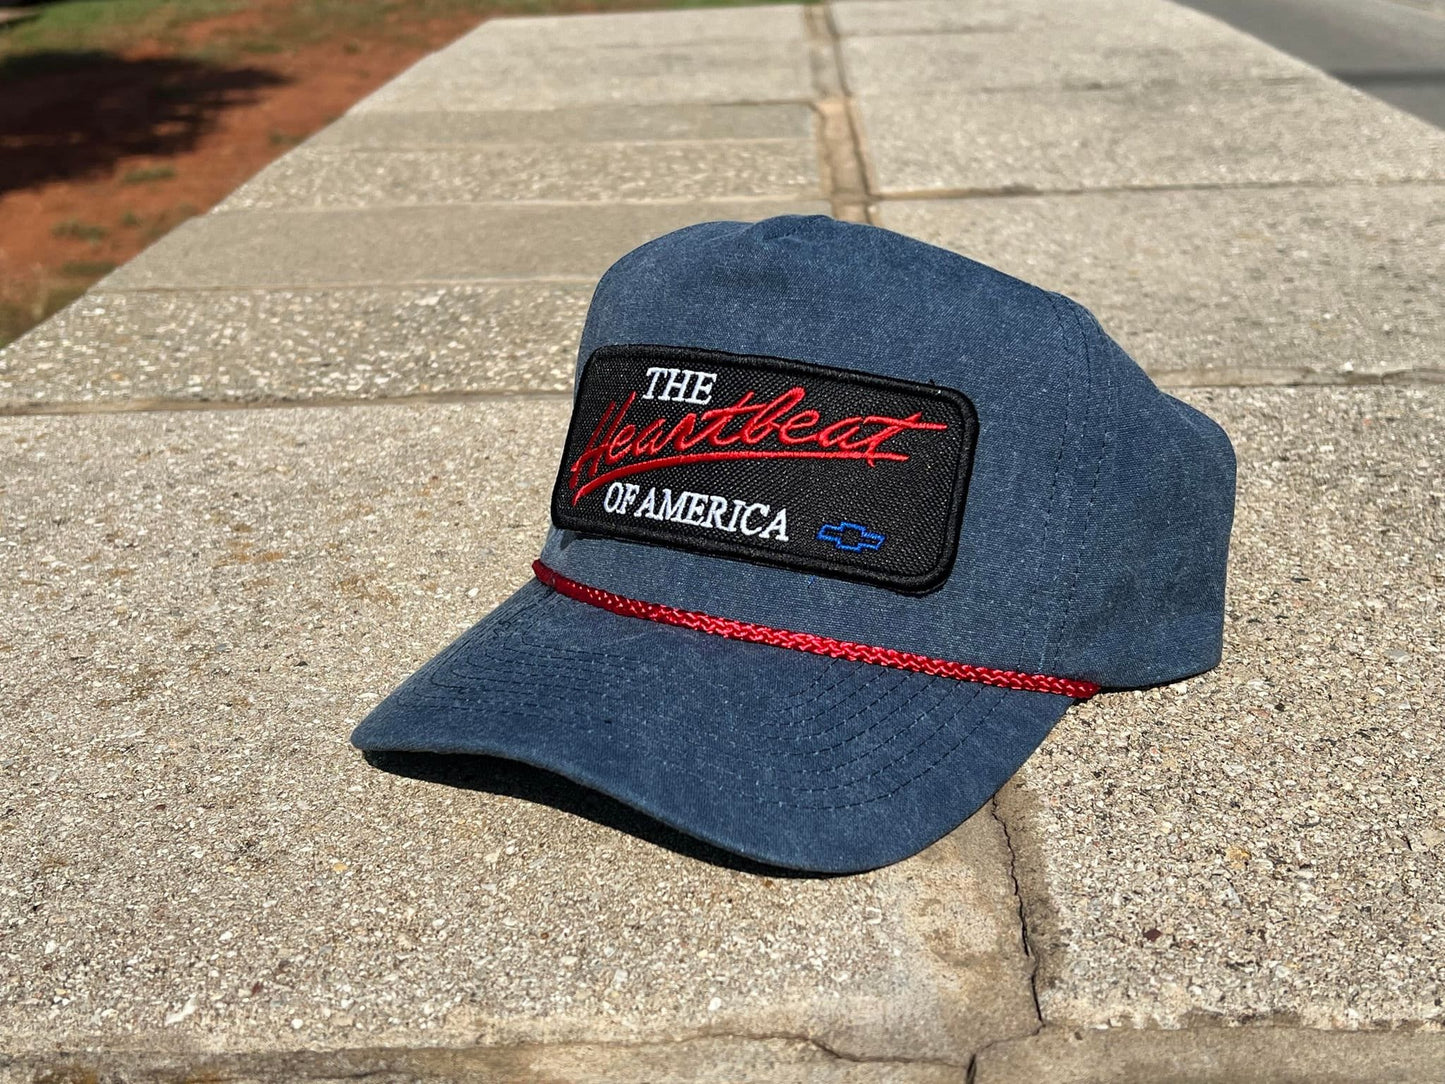 Vintage Chevrolet Heartbeat of America Rope Snapback Trucker Mesh Hat with Chevy Patch - Classic Chevy Truck Apparel for Men and Women